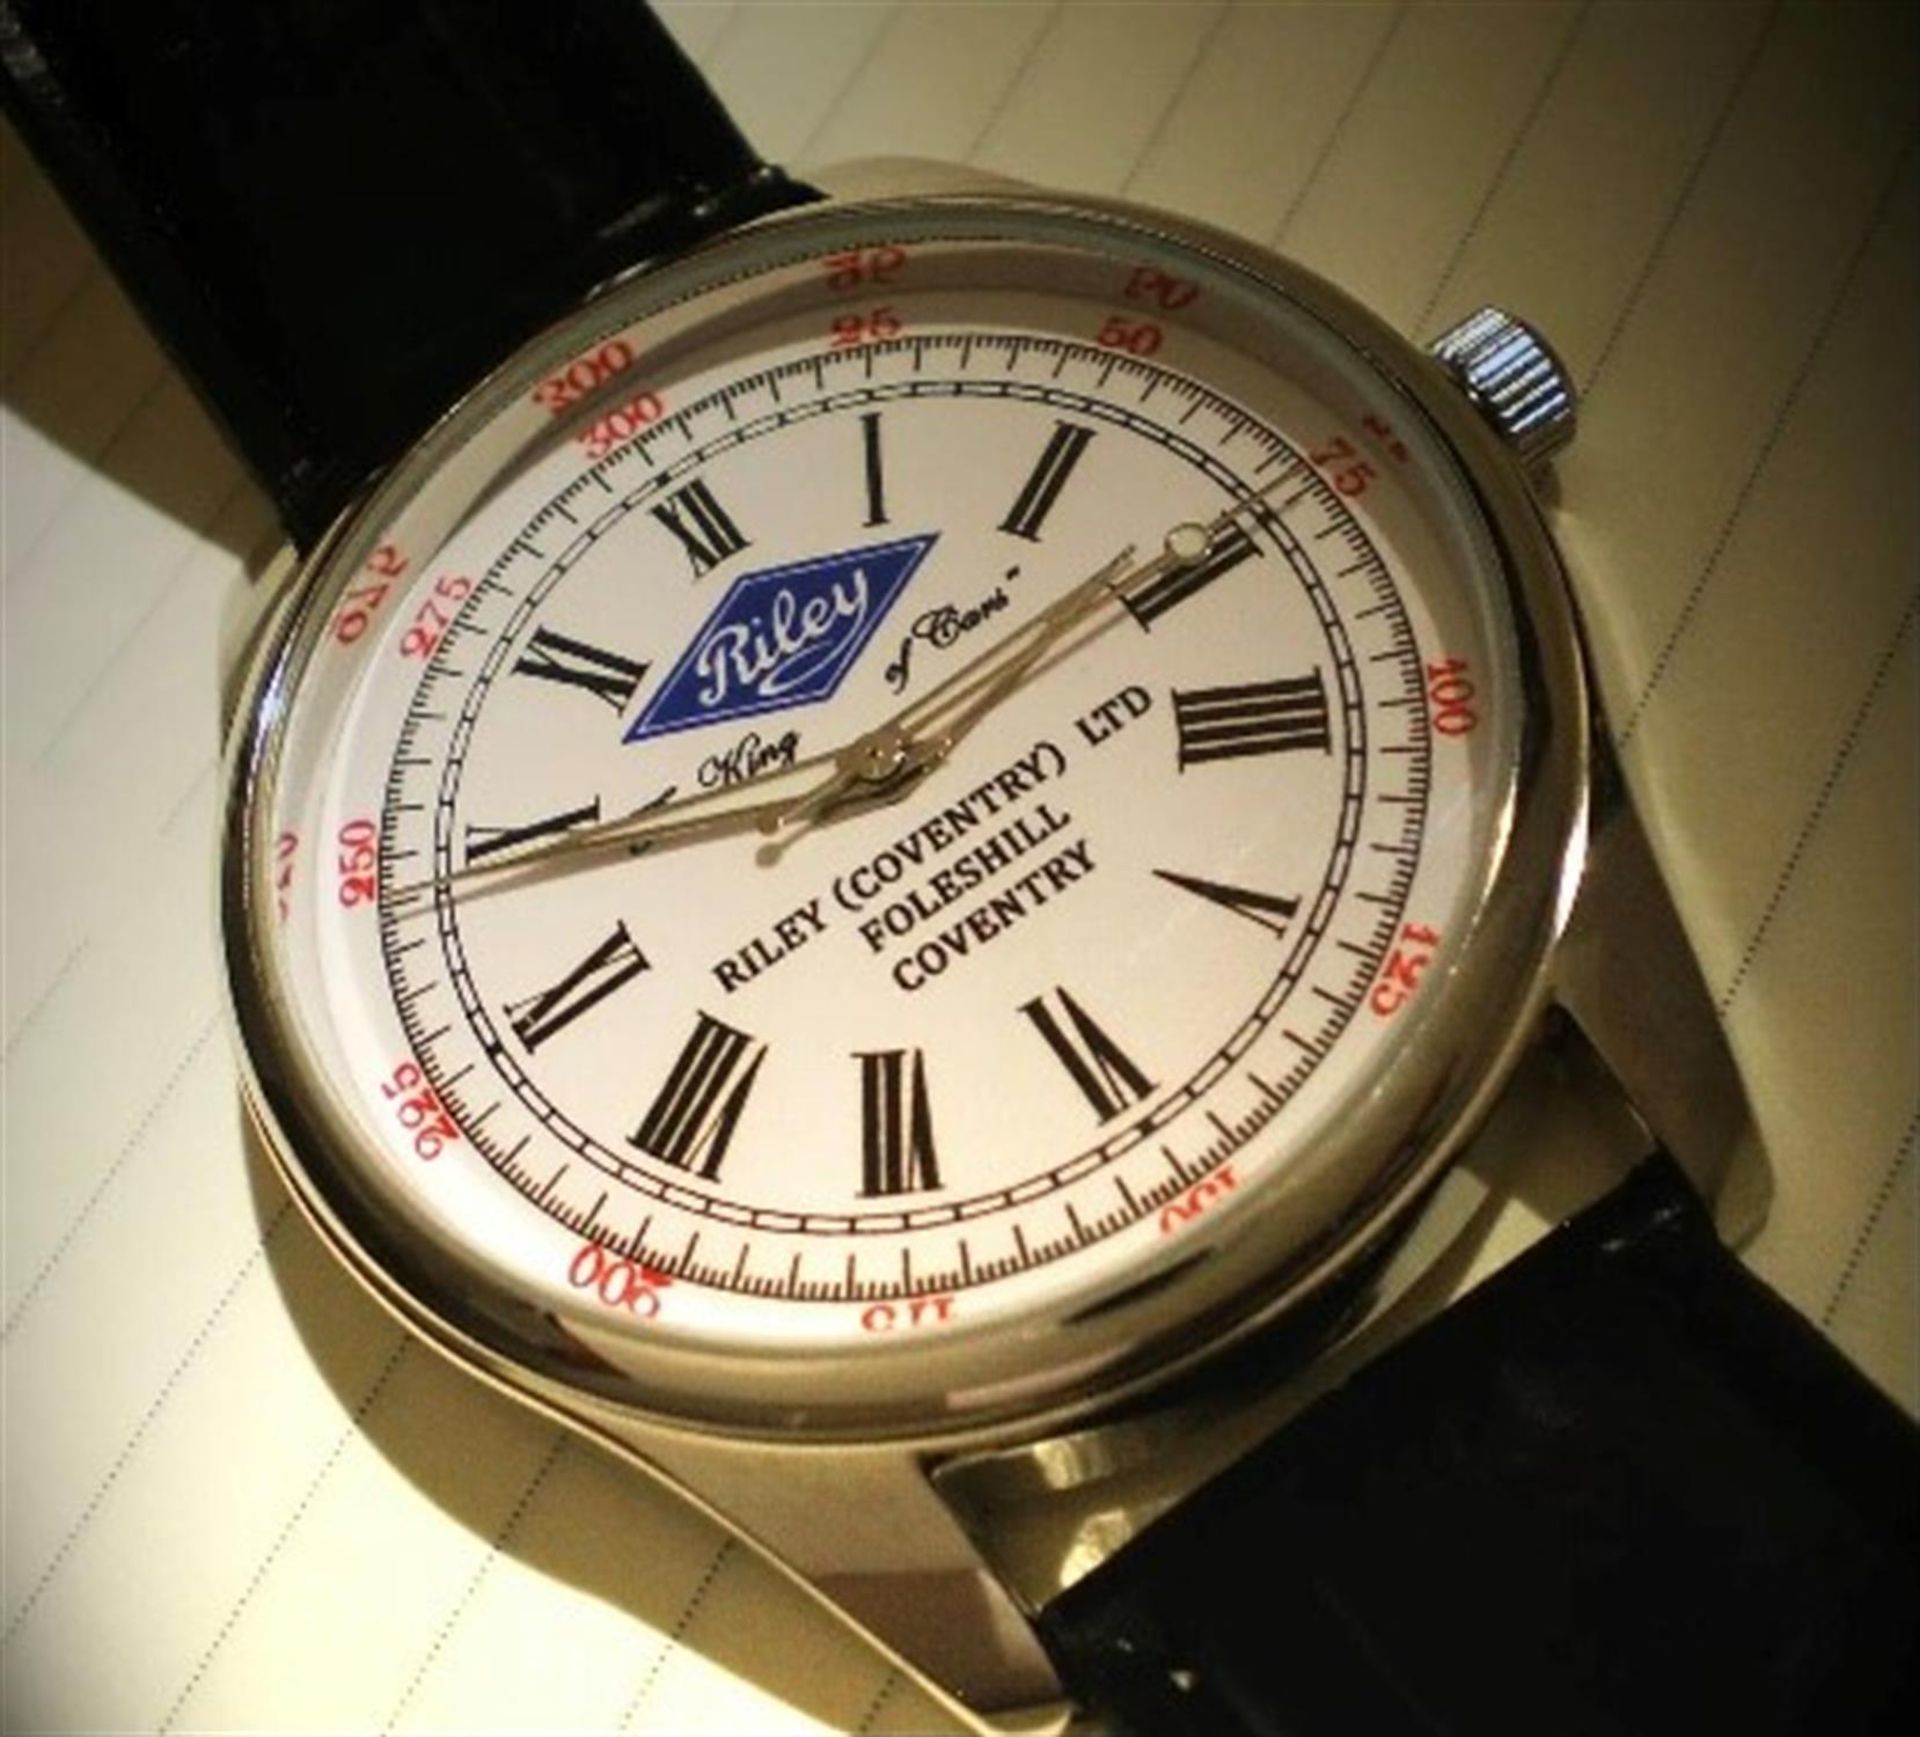 A Rare Contemporary Riley Homage Dress Watch - Image 2 of 5